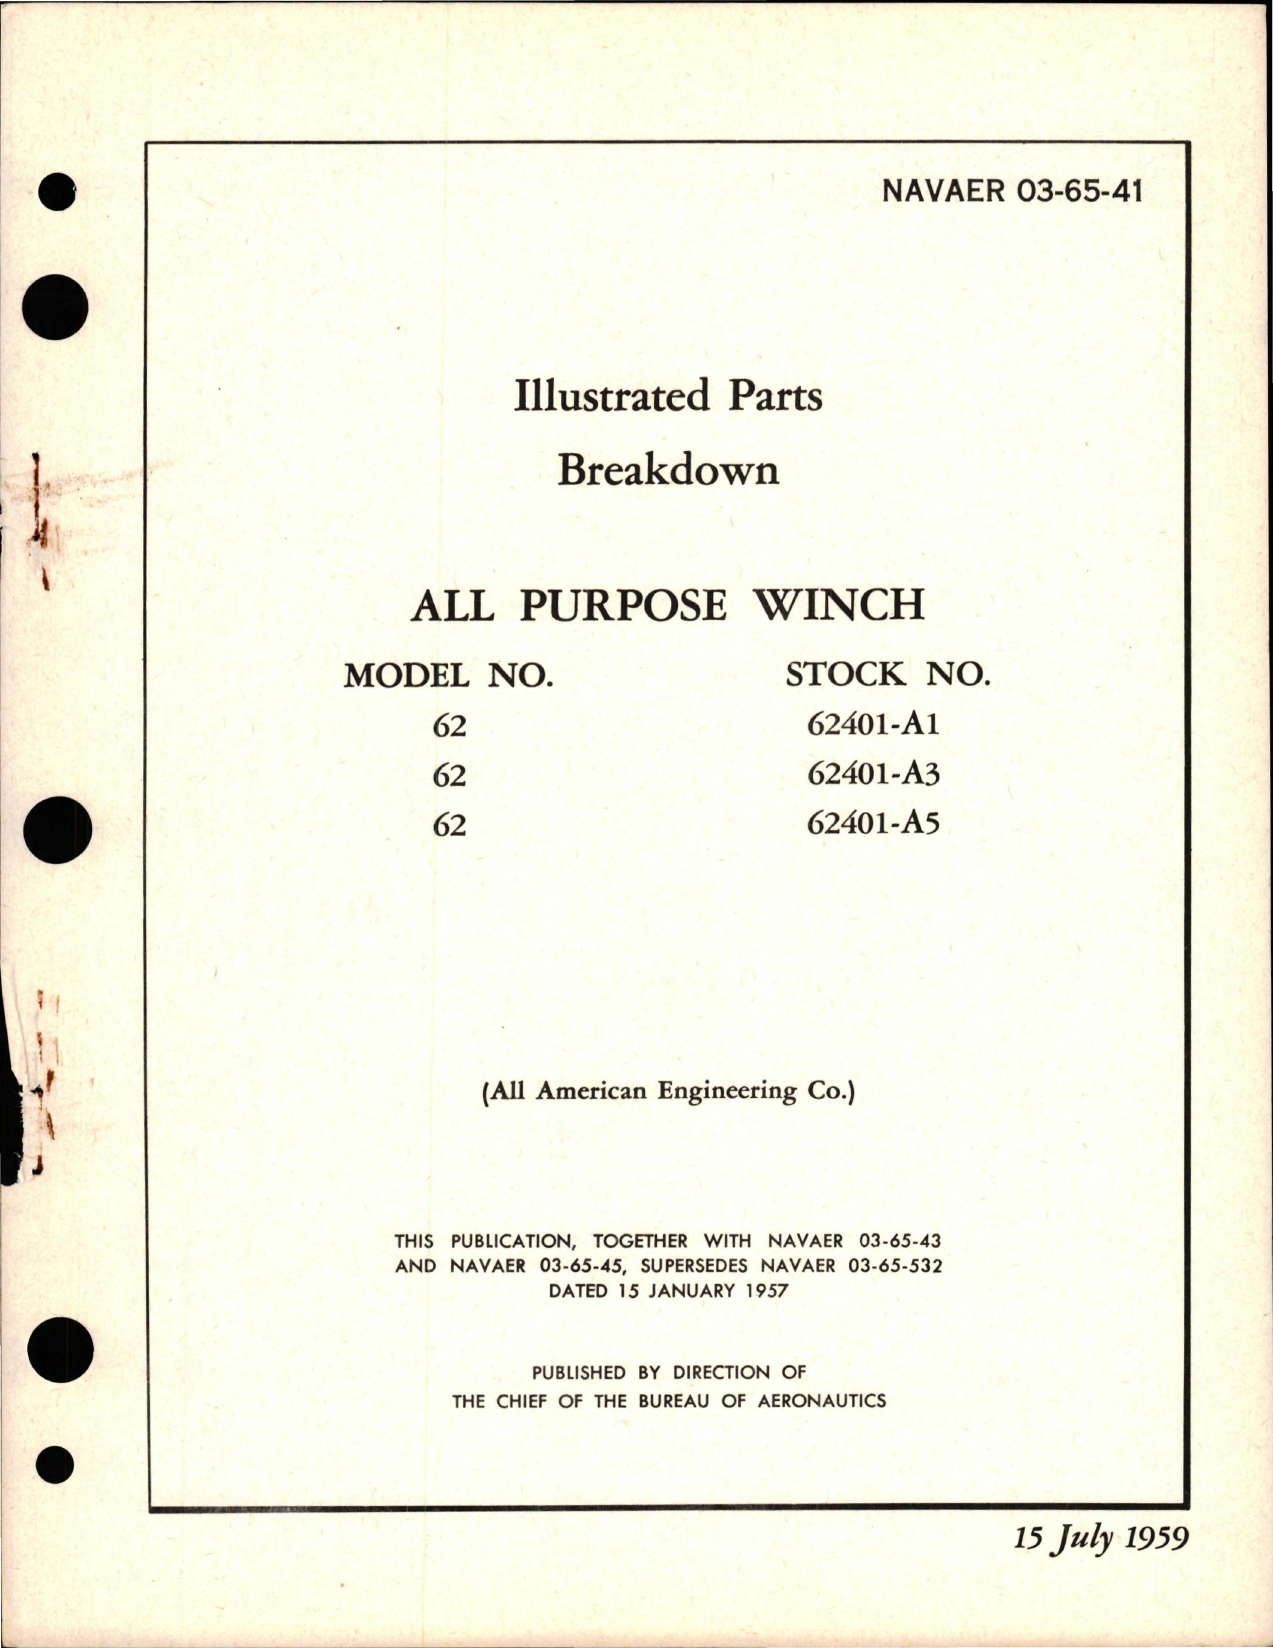 Sample page 1 from AirCorps Library document: Illustrated Parts Breakdown for All Purpose Winch - Model 62